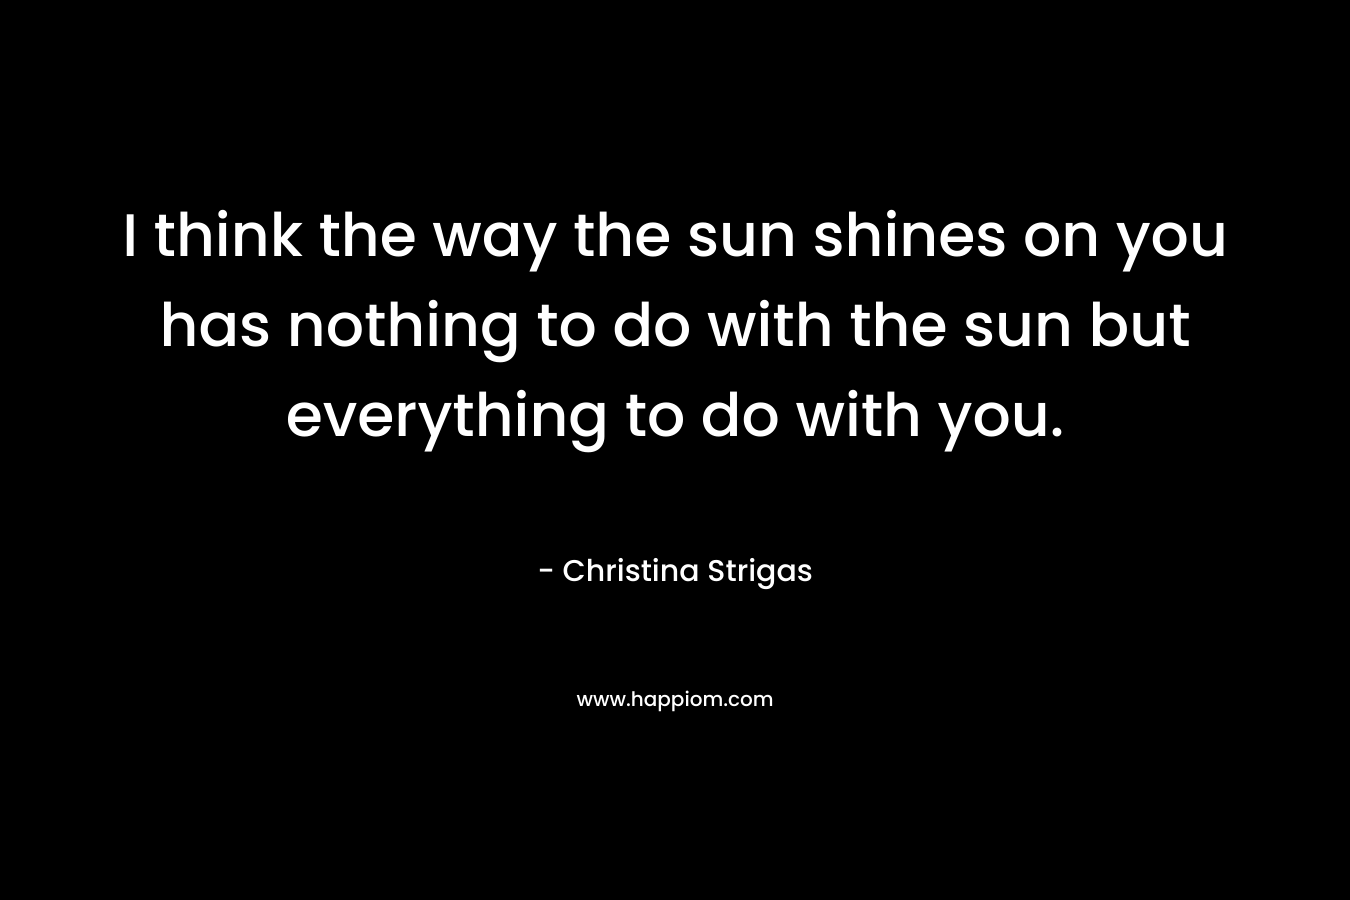 I think the way the sun shines on you has nothing to do with the sun but everything to do with you.